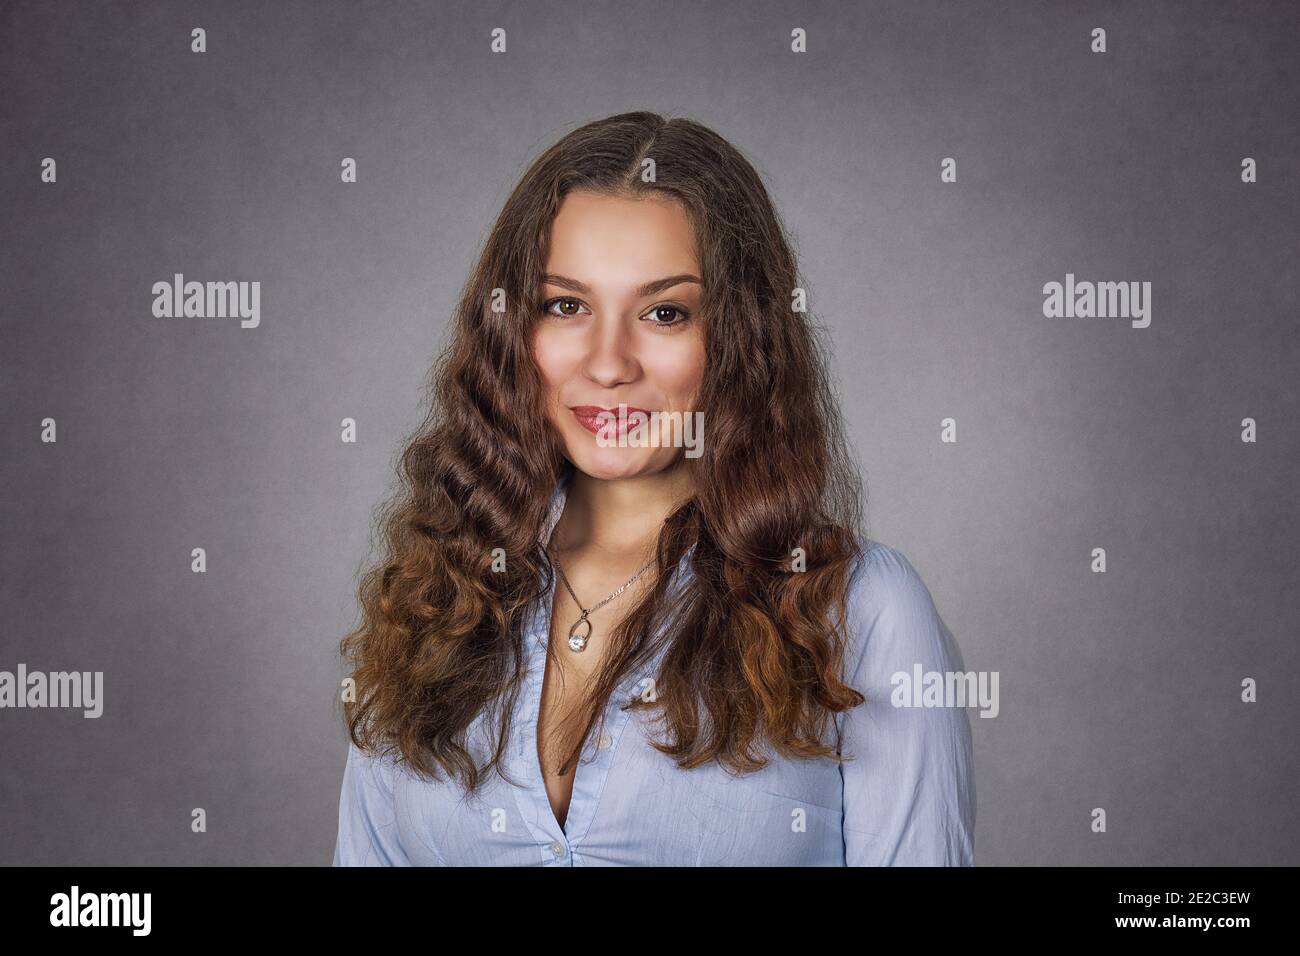 Portrait of a cute attractive young woman on gray background Stock Photo